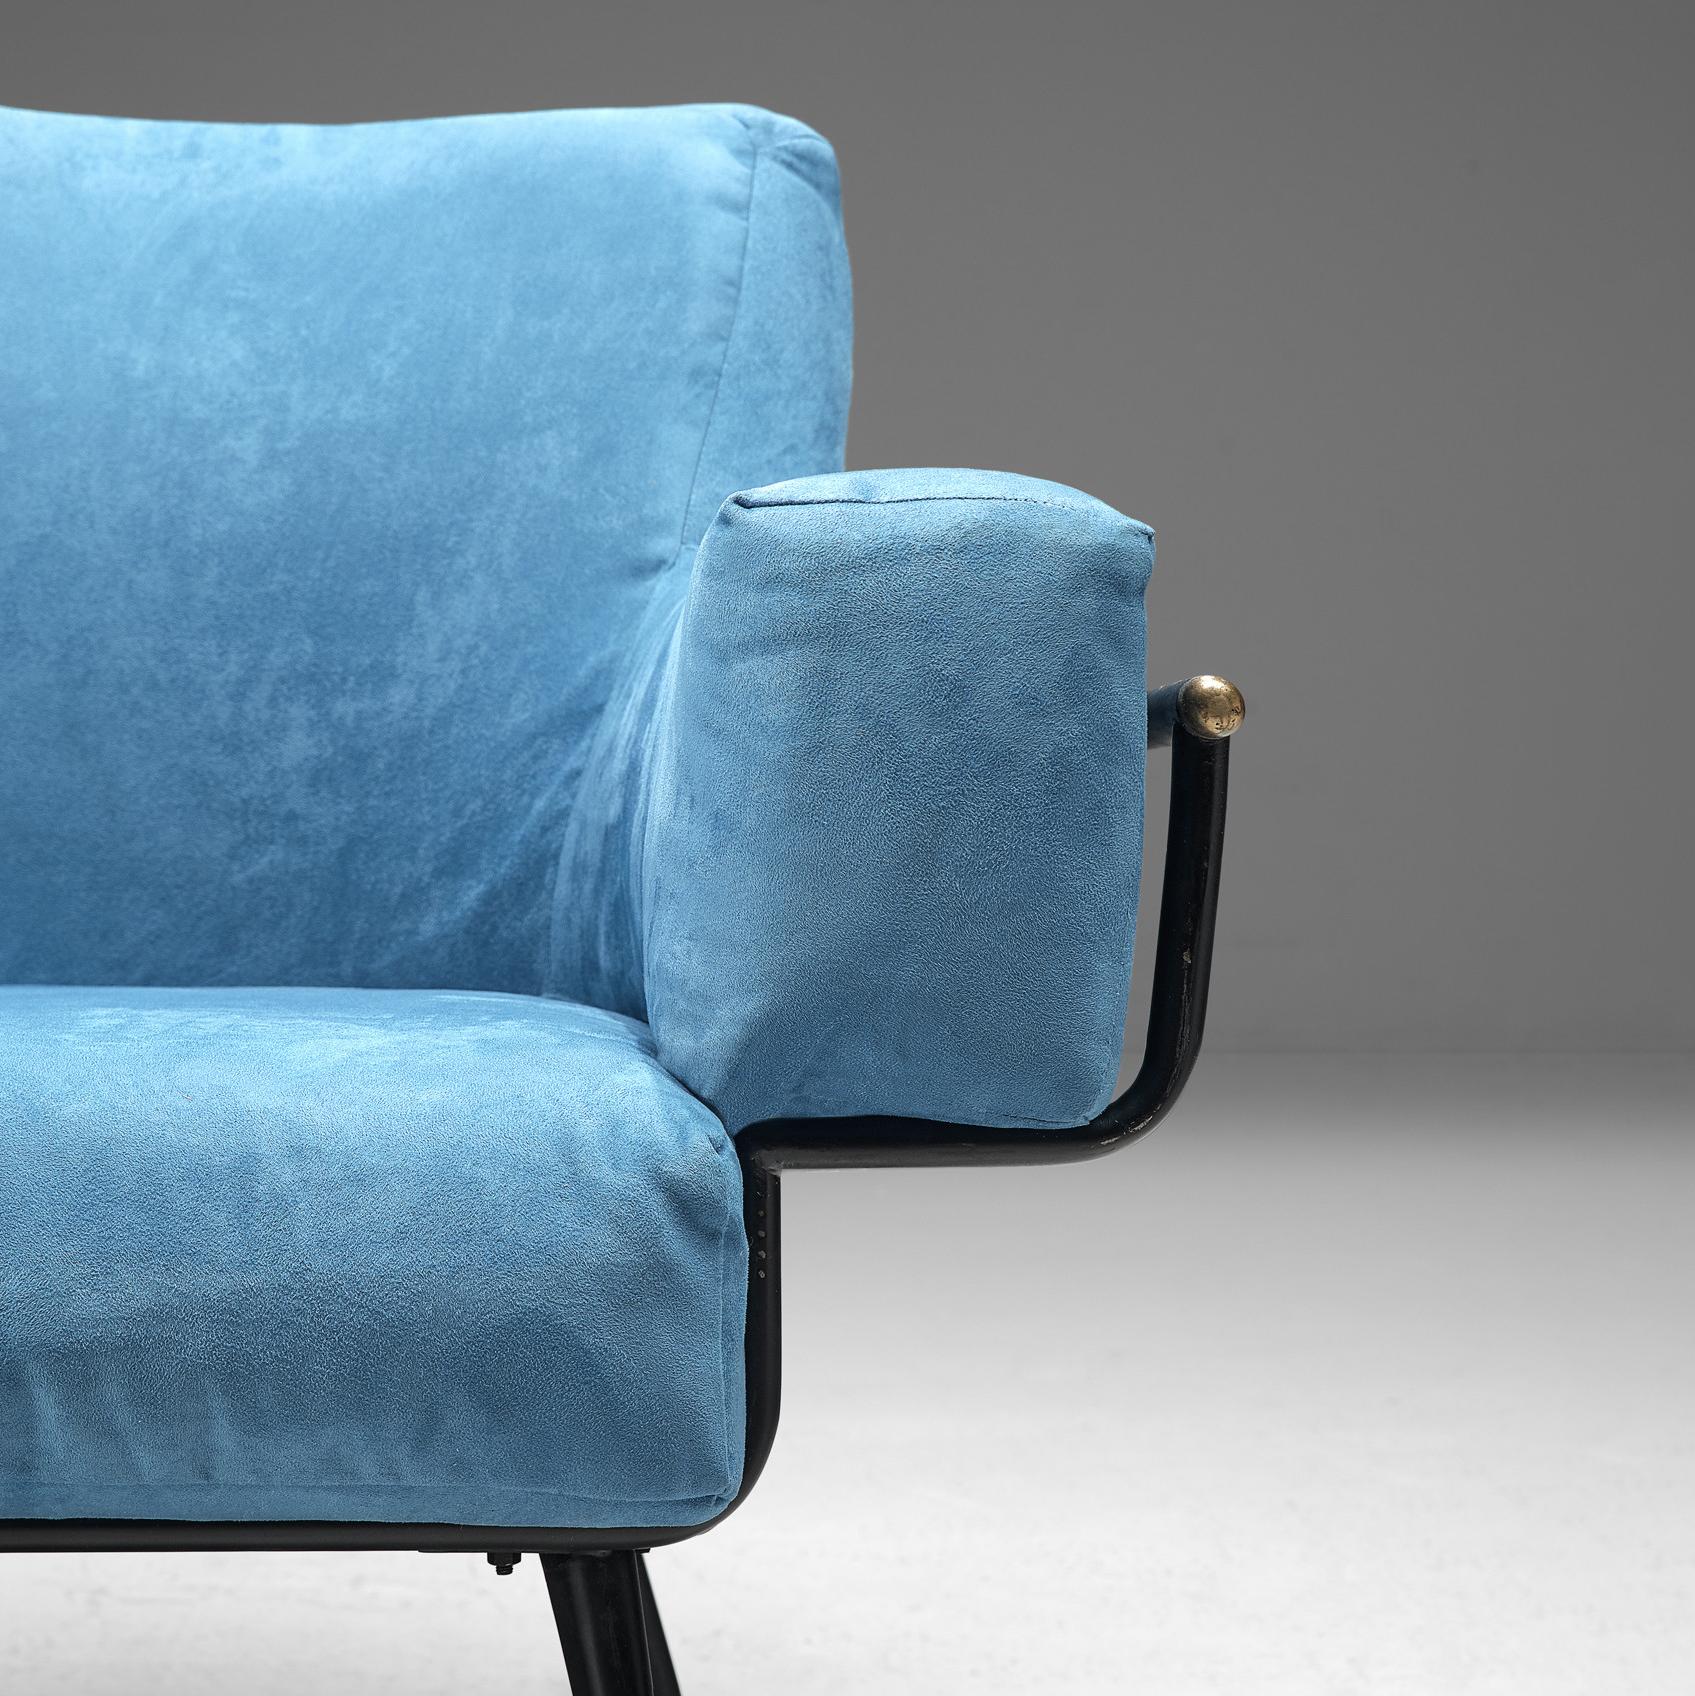 Mid-20th Century Pair of Italian Lounge Chairs in Blue Upholstery